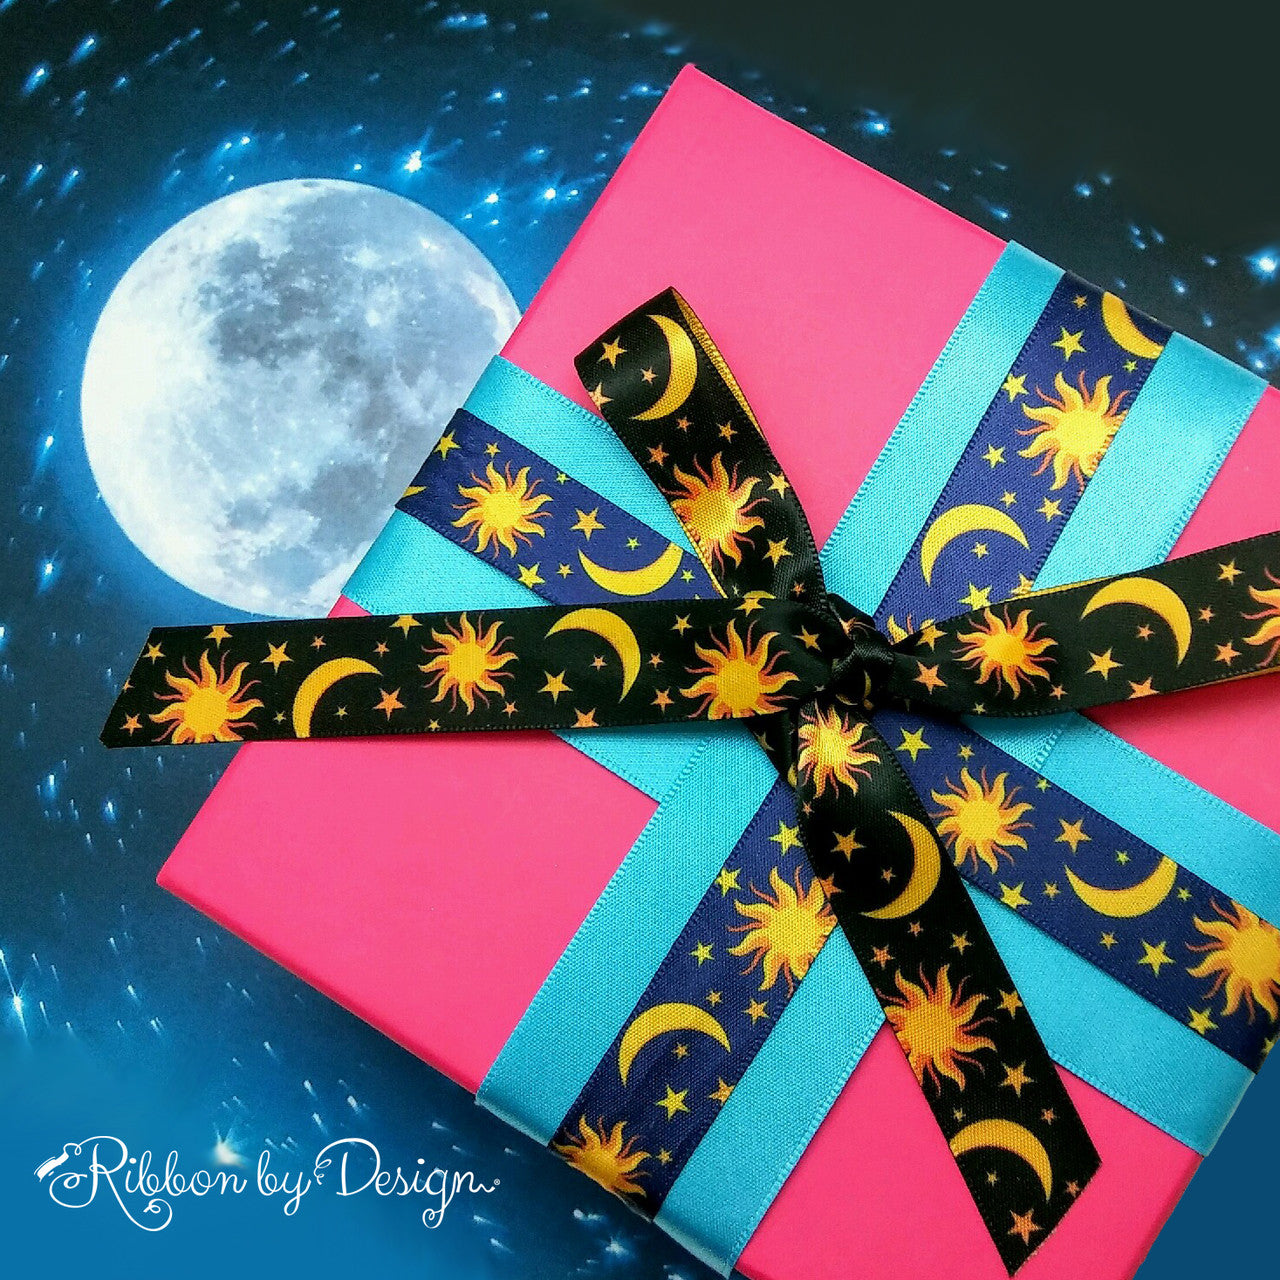 Our celestial ribbons in blue and black tied on a vibrant pink package makes a very dreamy gift!